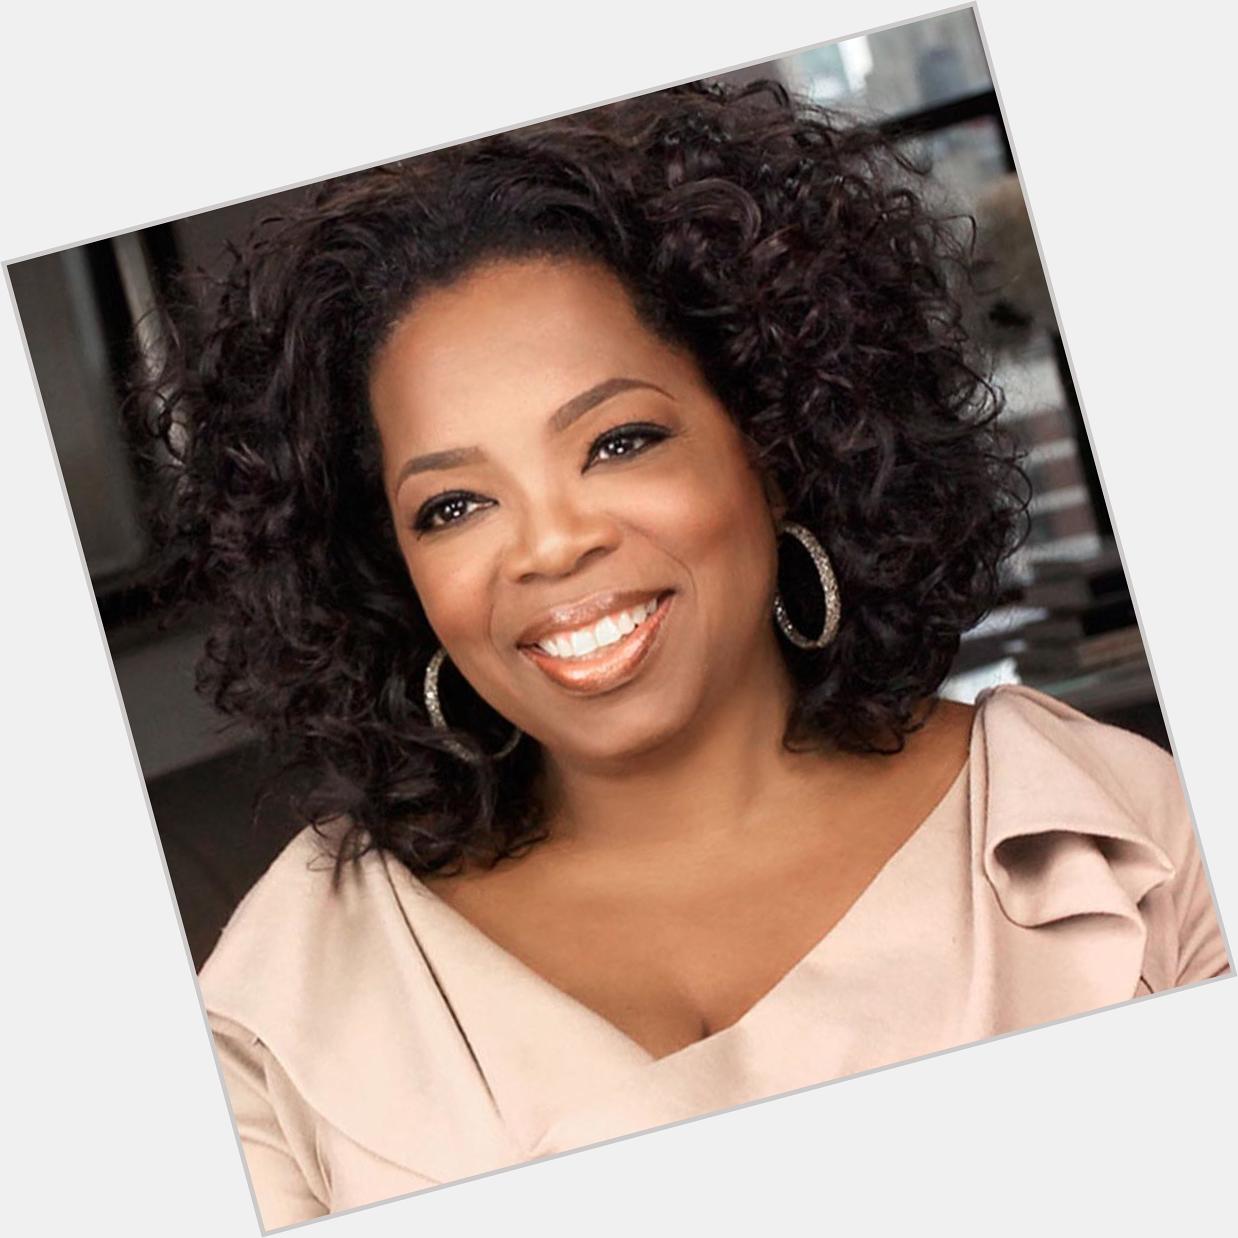 Happy birthday Oprah Winfrey and many others. Have a nice day... 